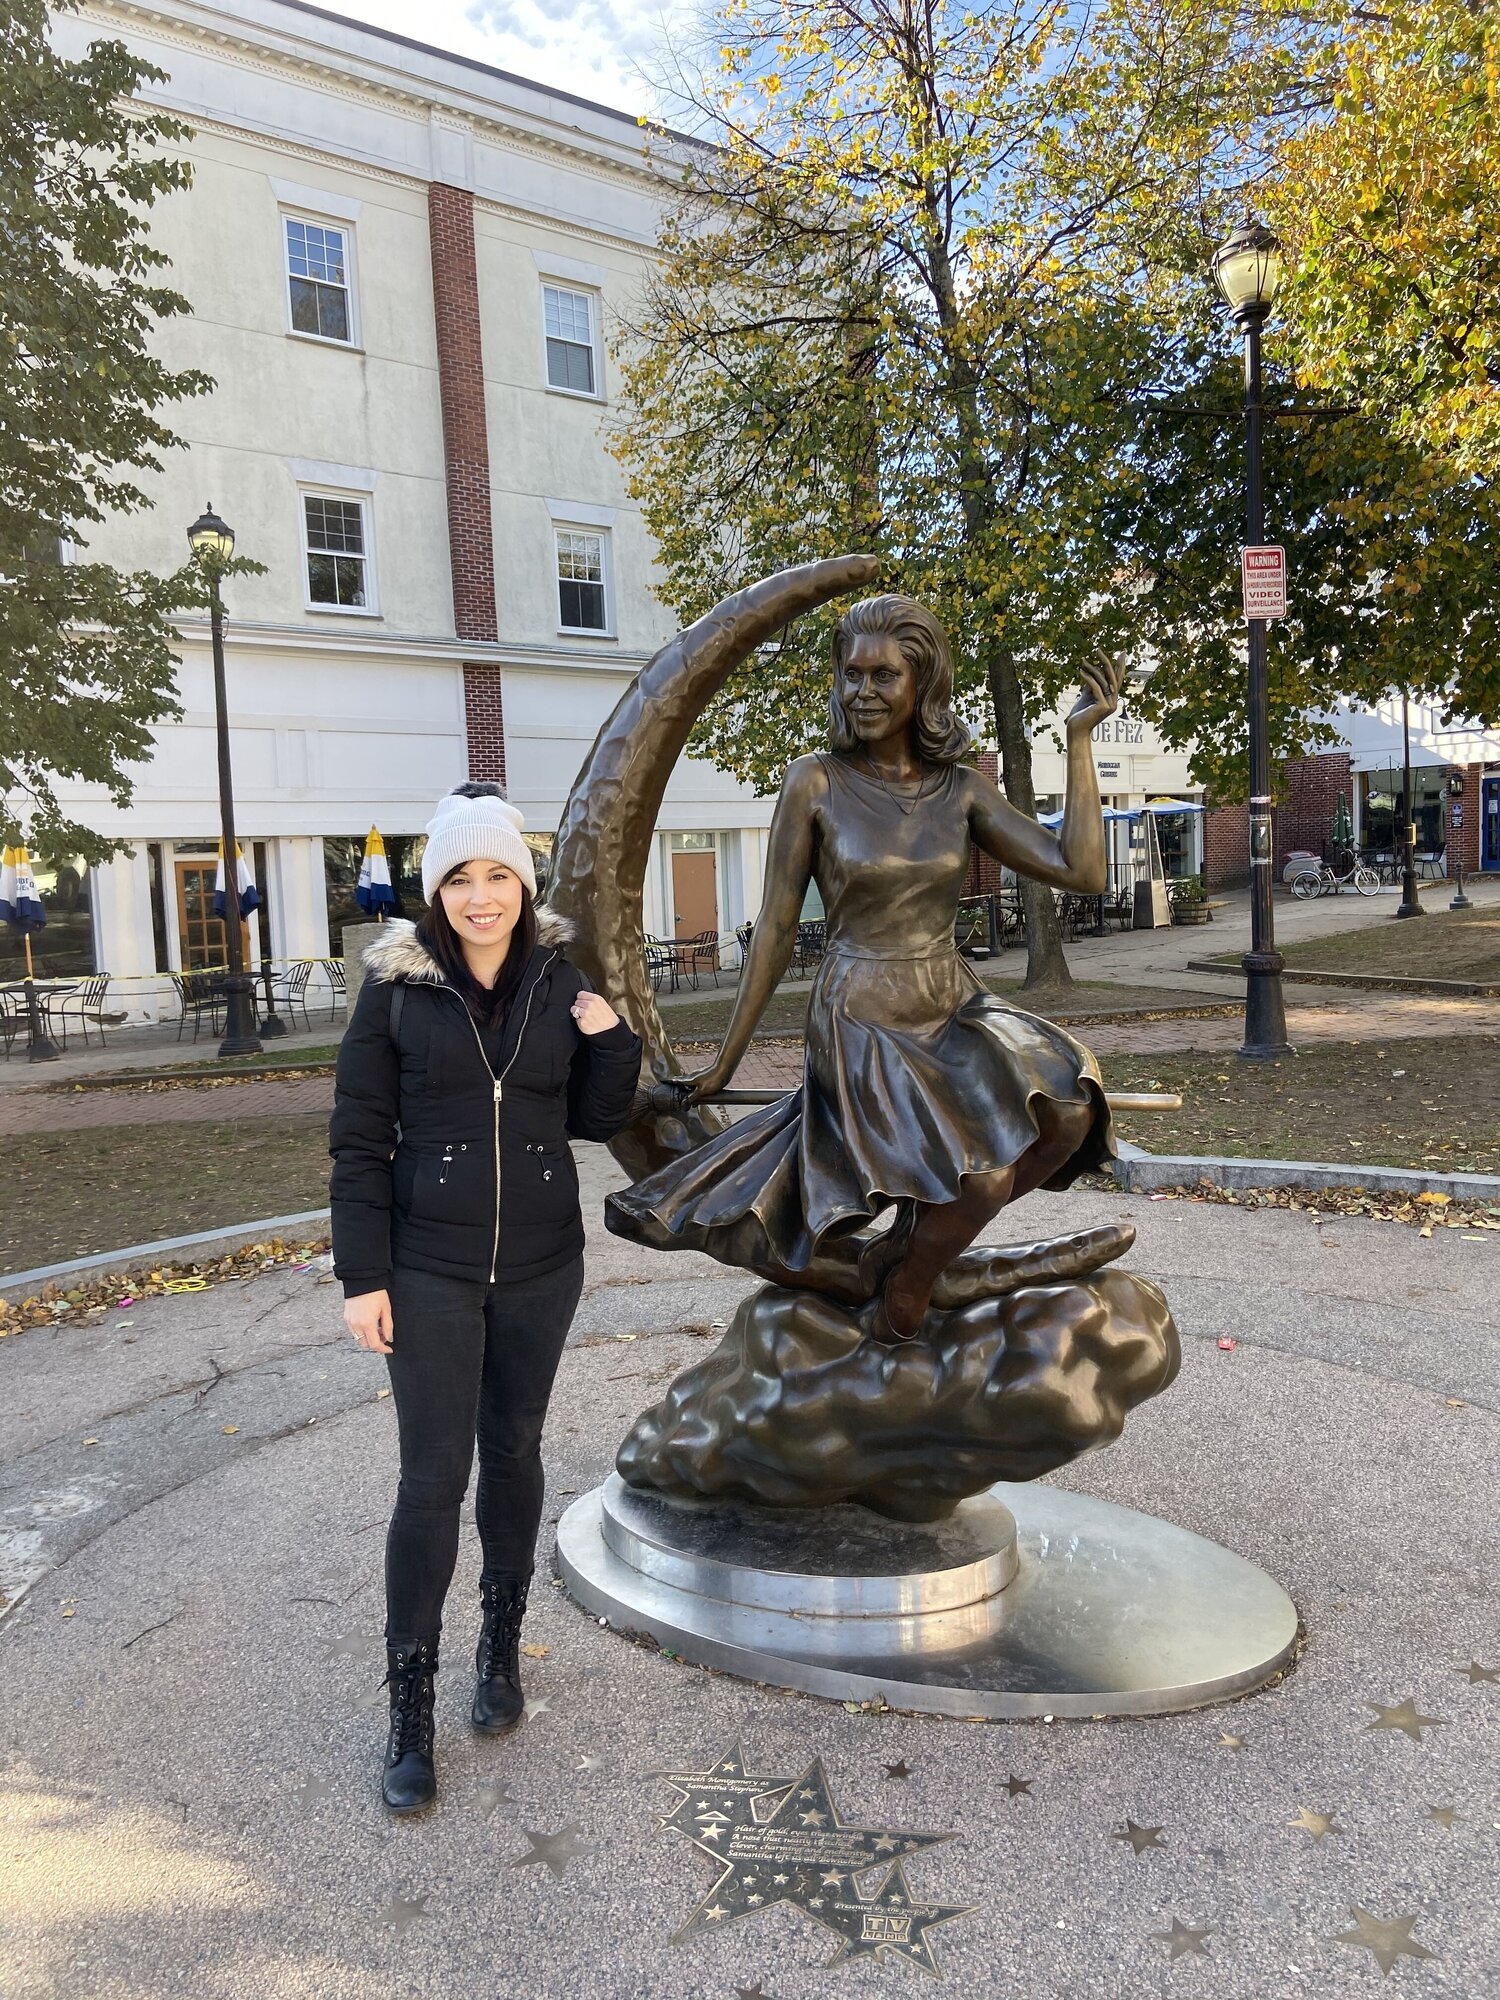 Tiff next to the famous Bewitched statue